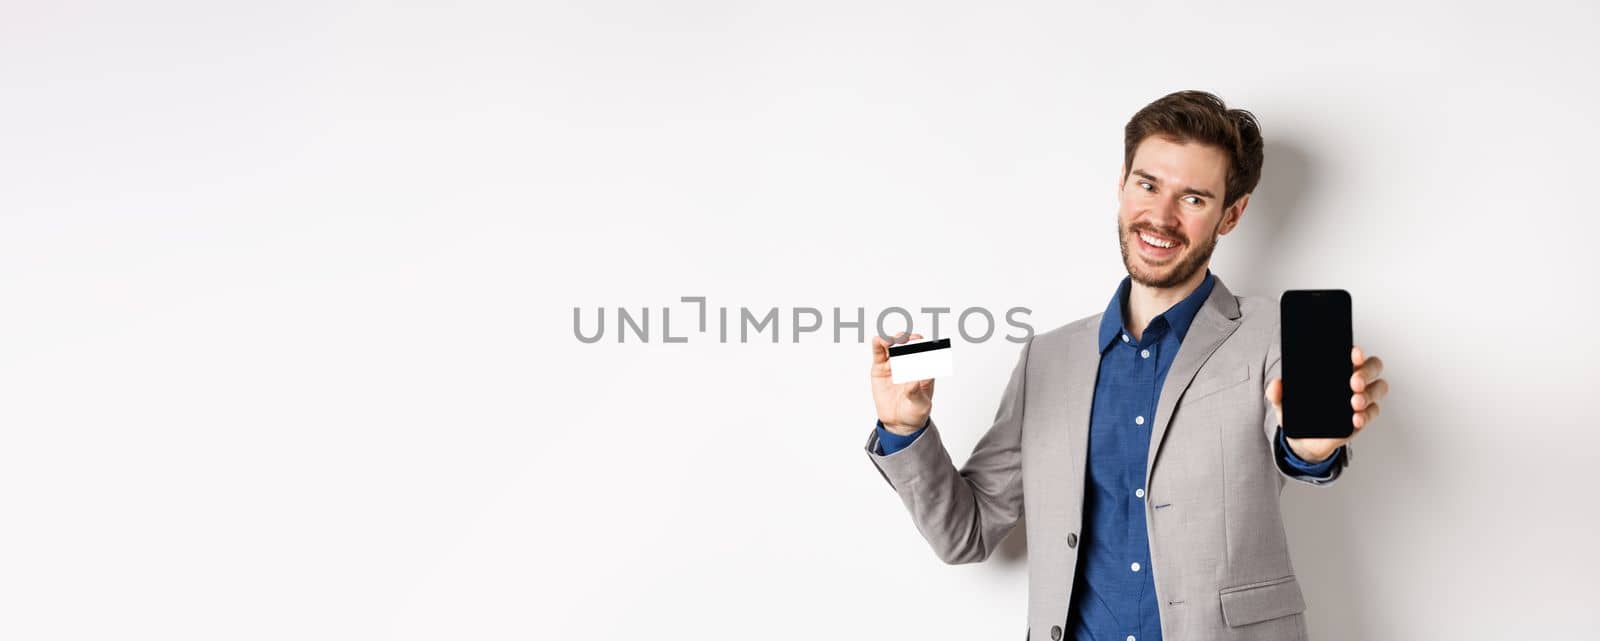 Online shopping. Successful businessman holding plastic credit card and showing mobile screen, smiling satisfied, making money, white background.